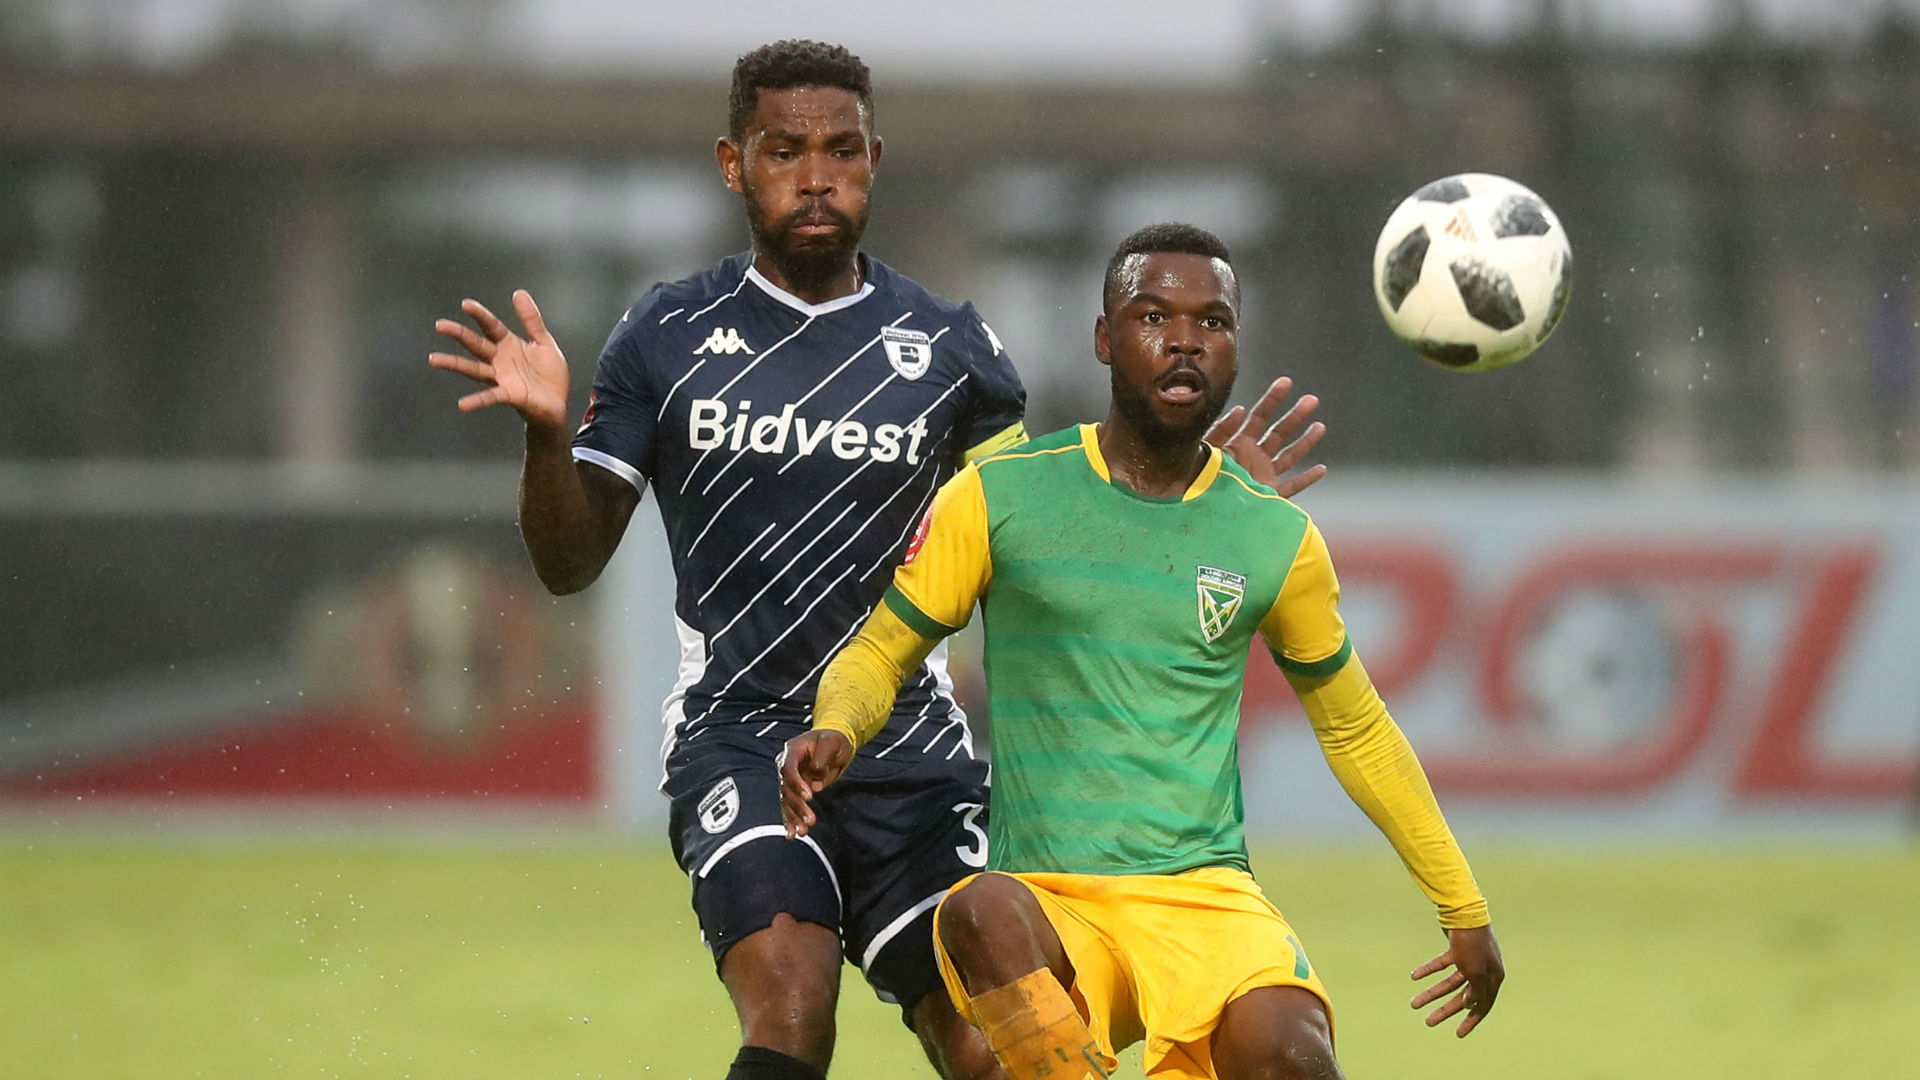 Bidvest Wits edge Golden Arrows 1-0 to rise to fifth on log - Sports Leo